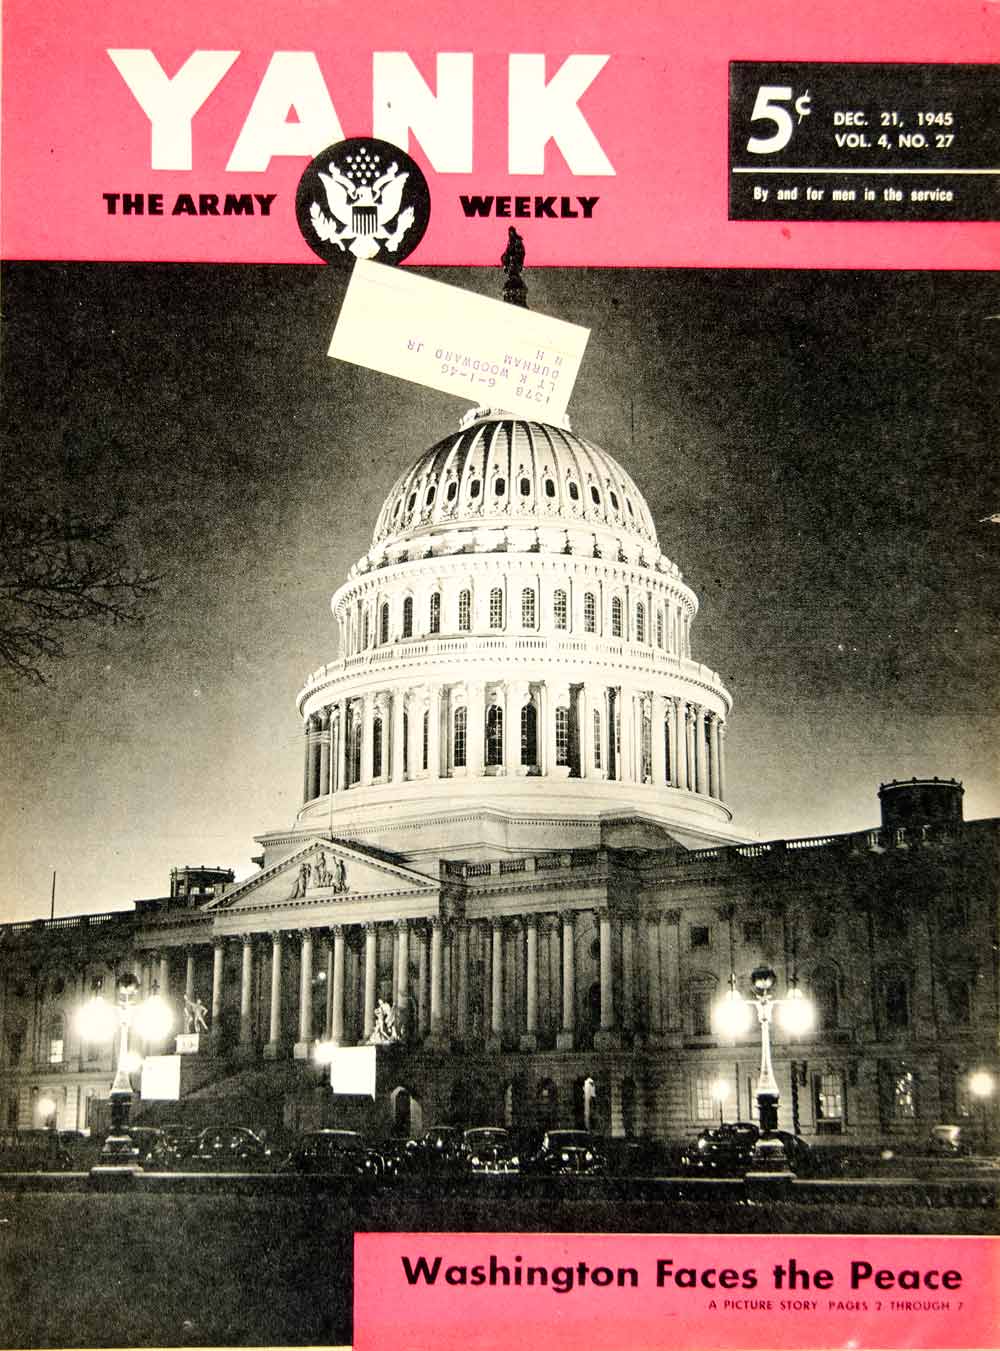 1945 Cover YANK Capitol Building Peacetime World War II Architecture Image YYA2